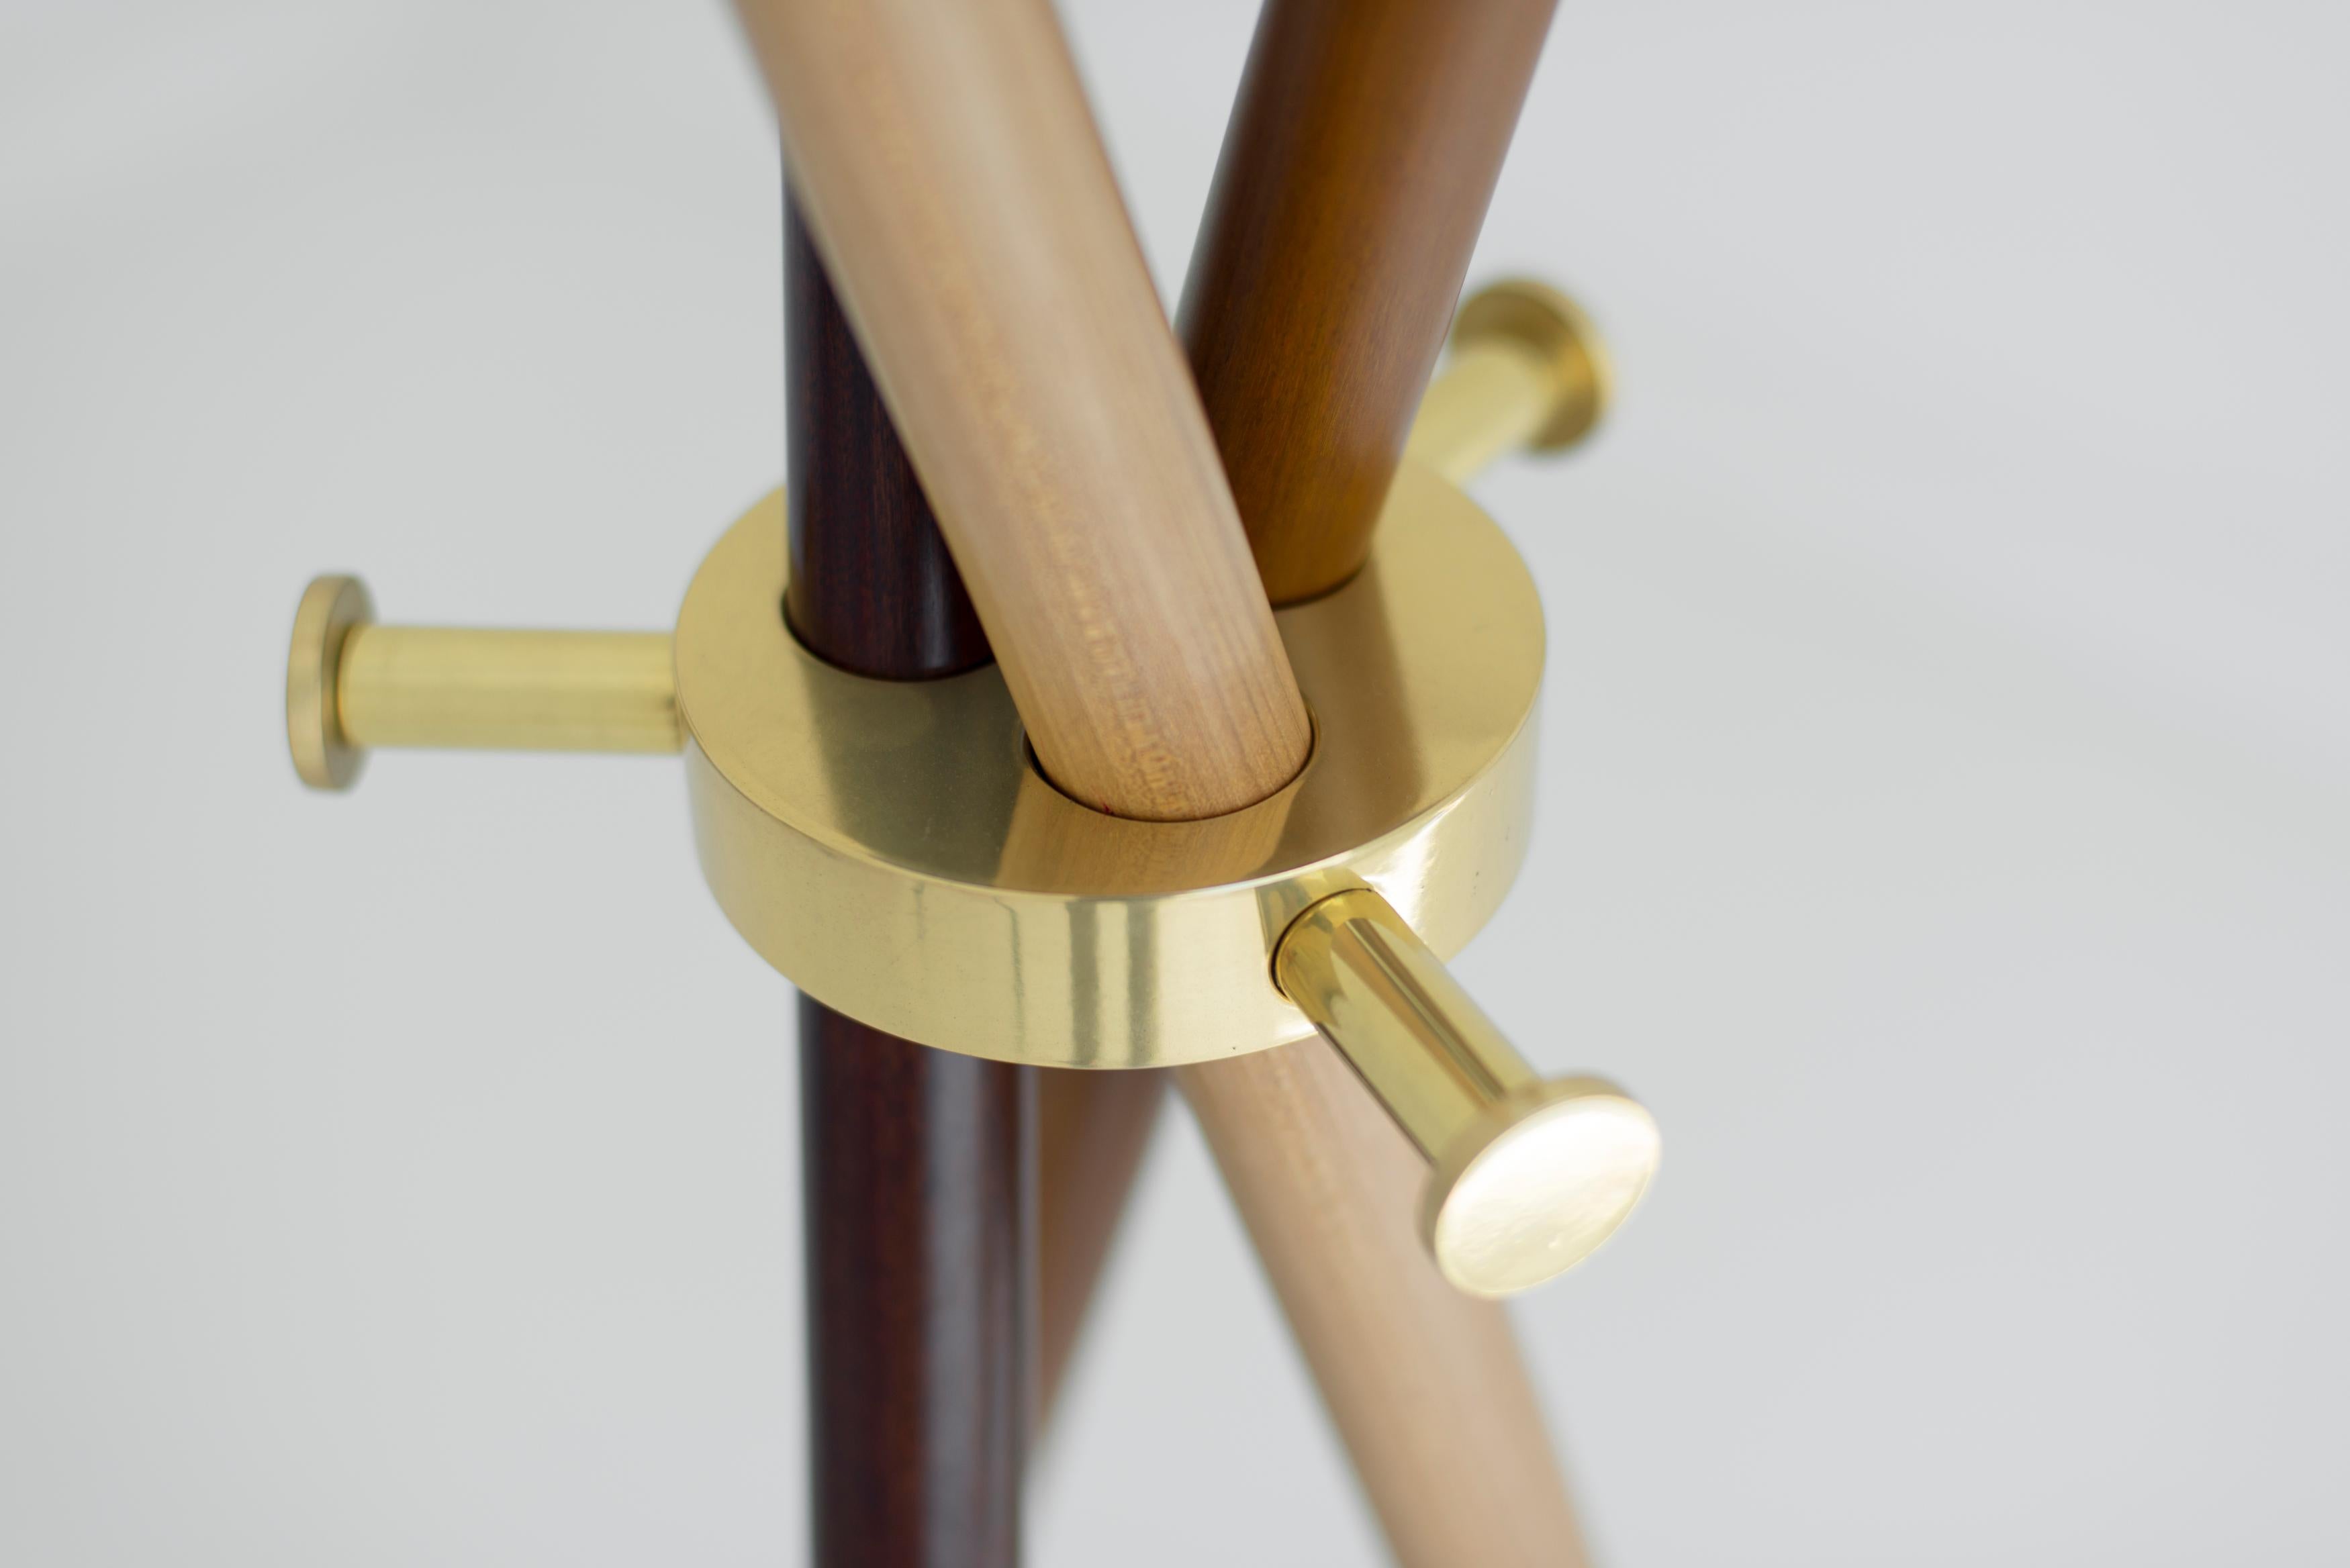 Modern Brass and wood Sculpted Coat Stand, Leandro Garcia, Contemporary Brazil Design